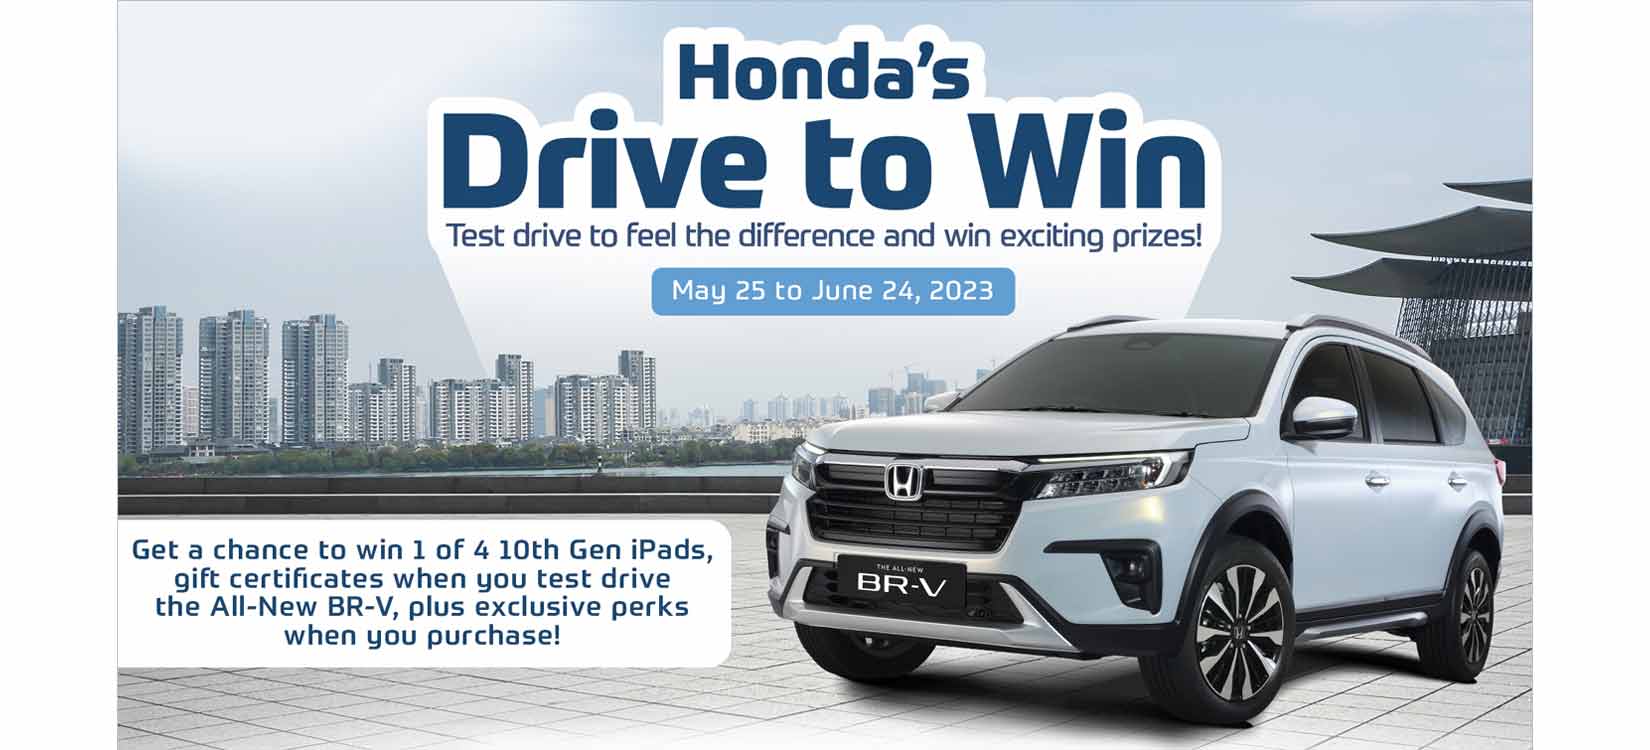 Test drive the All-New Honda BR-V and get a chance to win exciting prizes